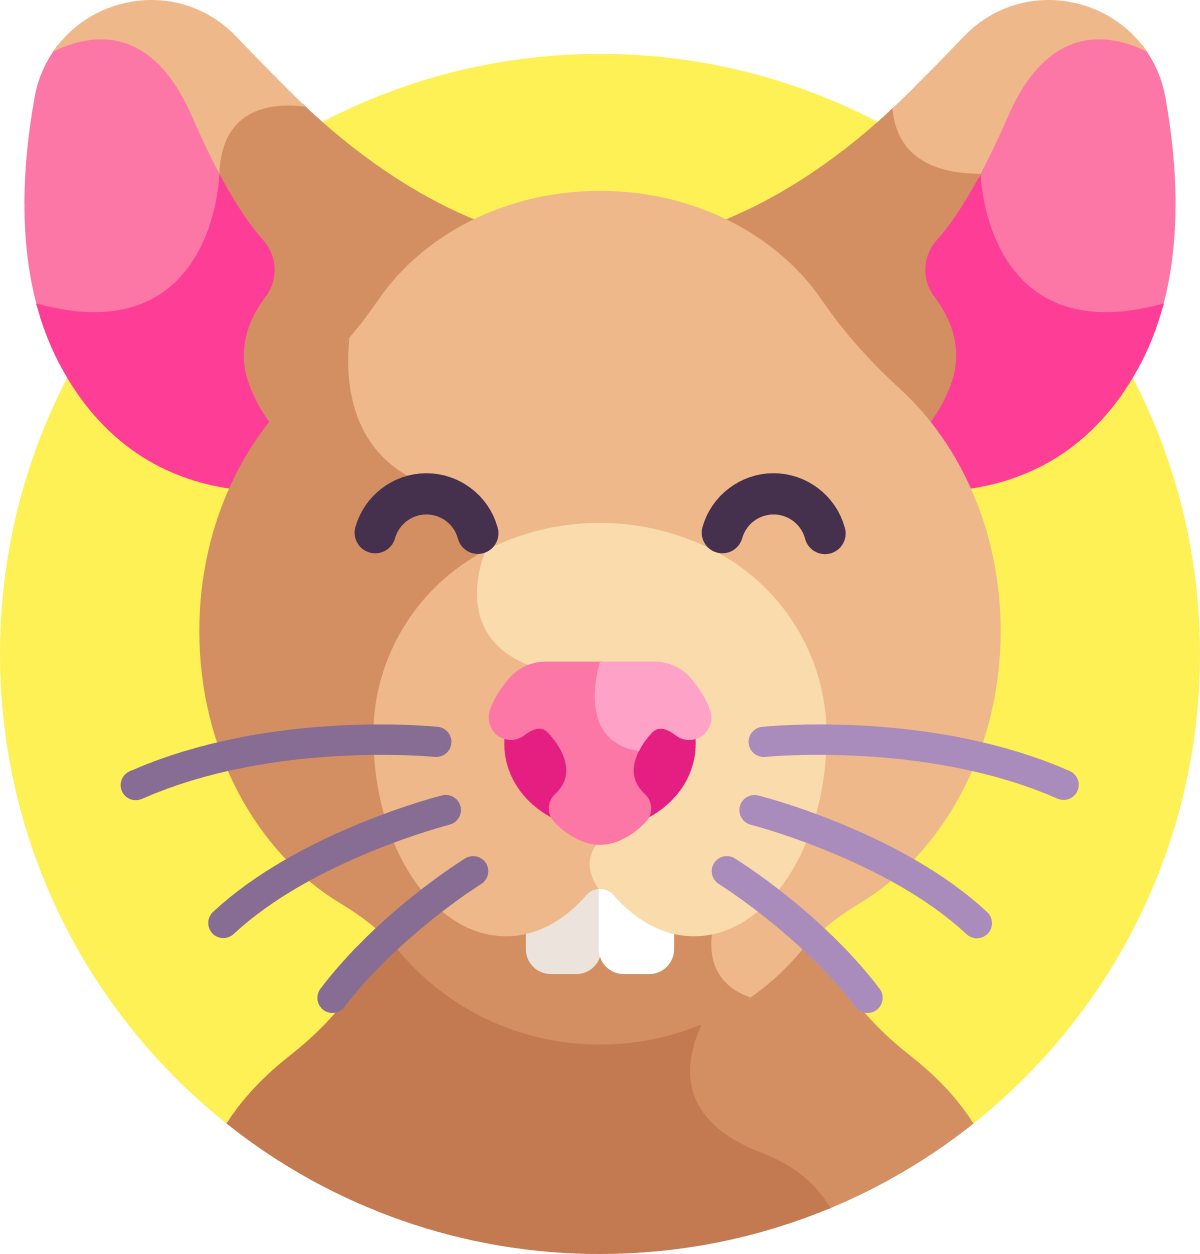 The Chinese horoscope for Rat